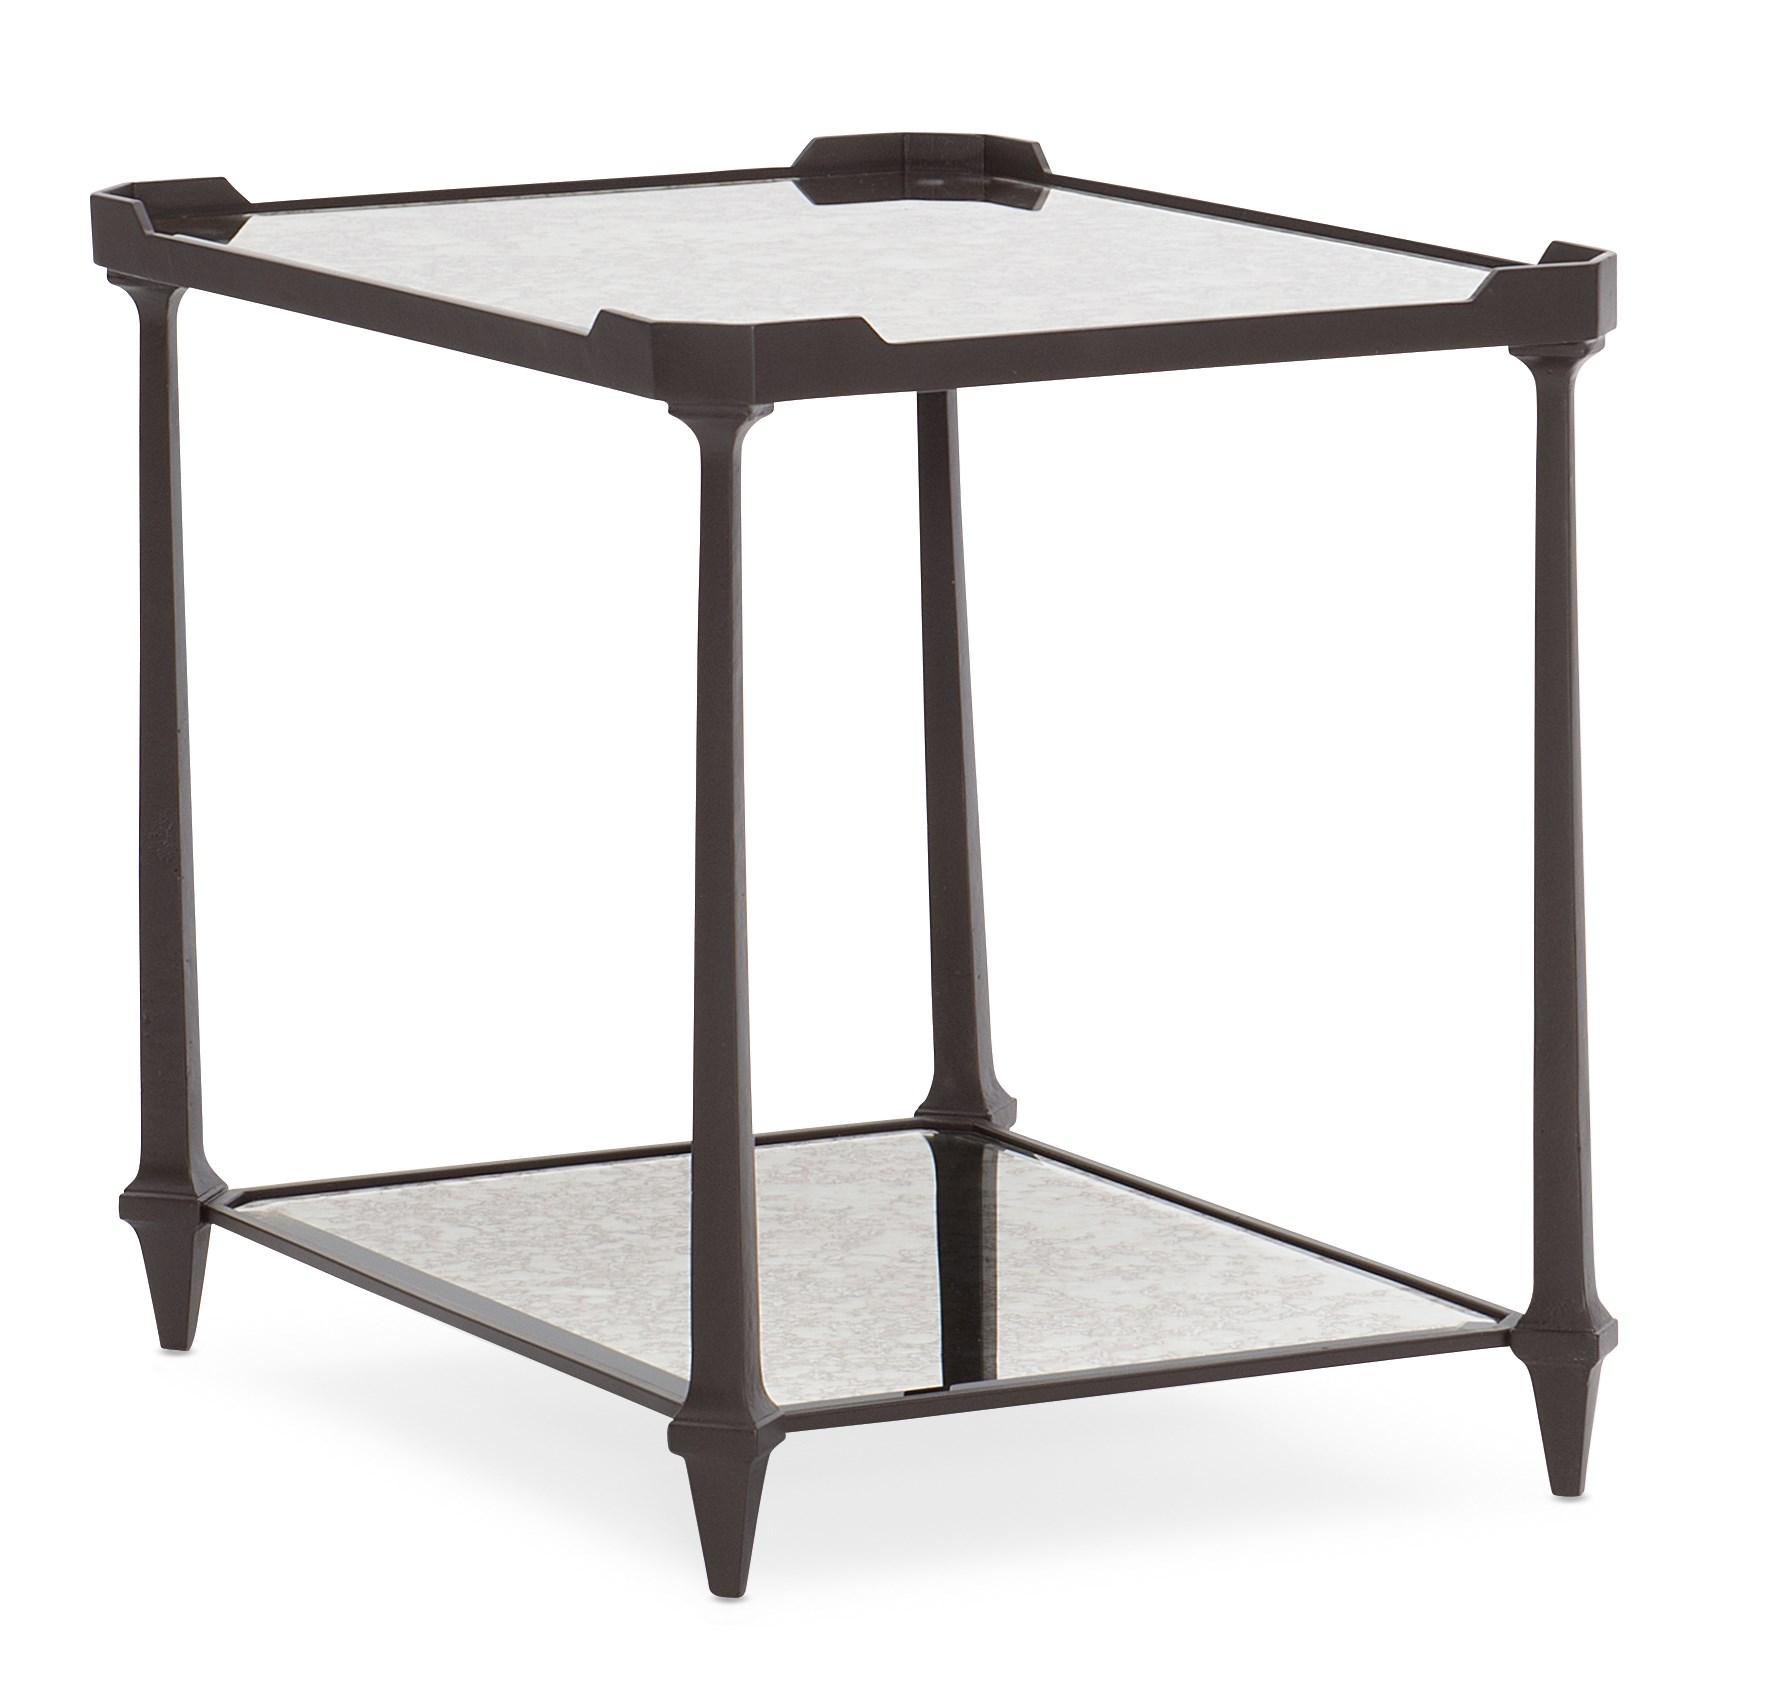 Contemporary End Table END ALL CLA-019-417 in Chocolate 